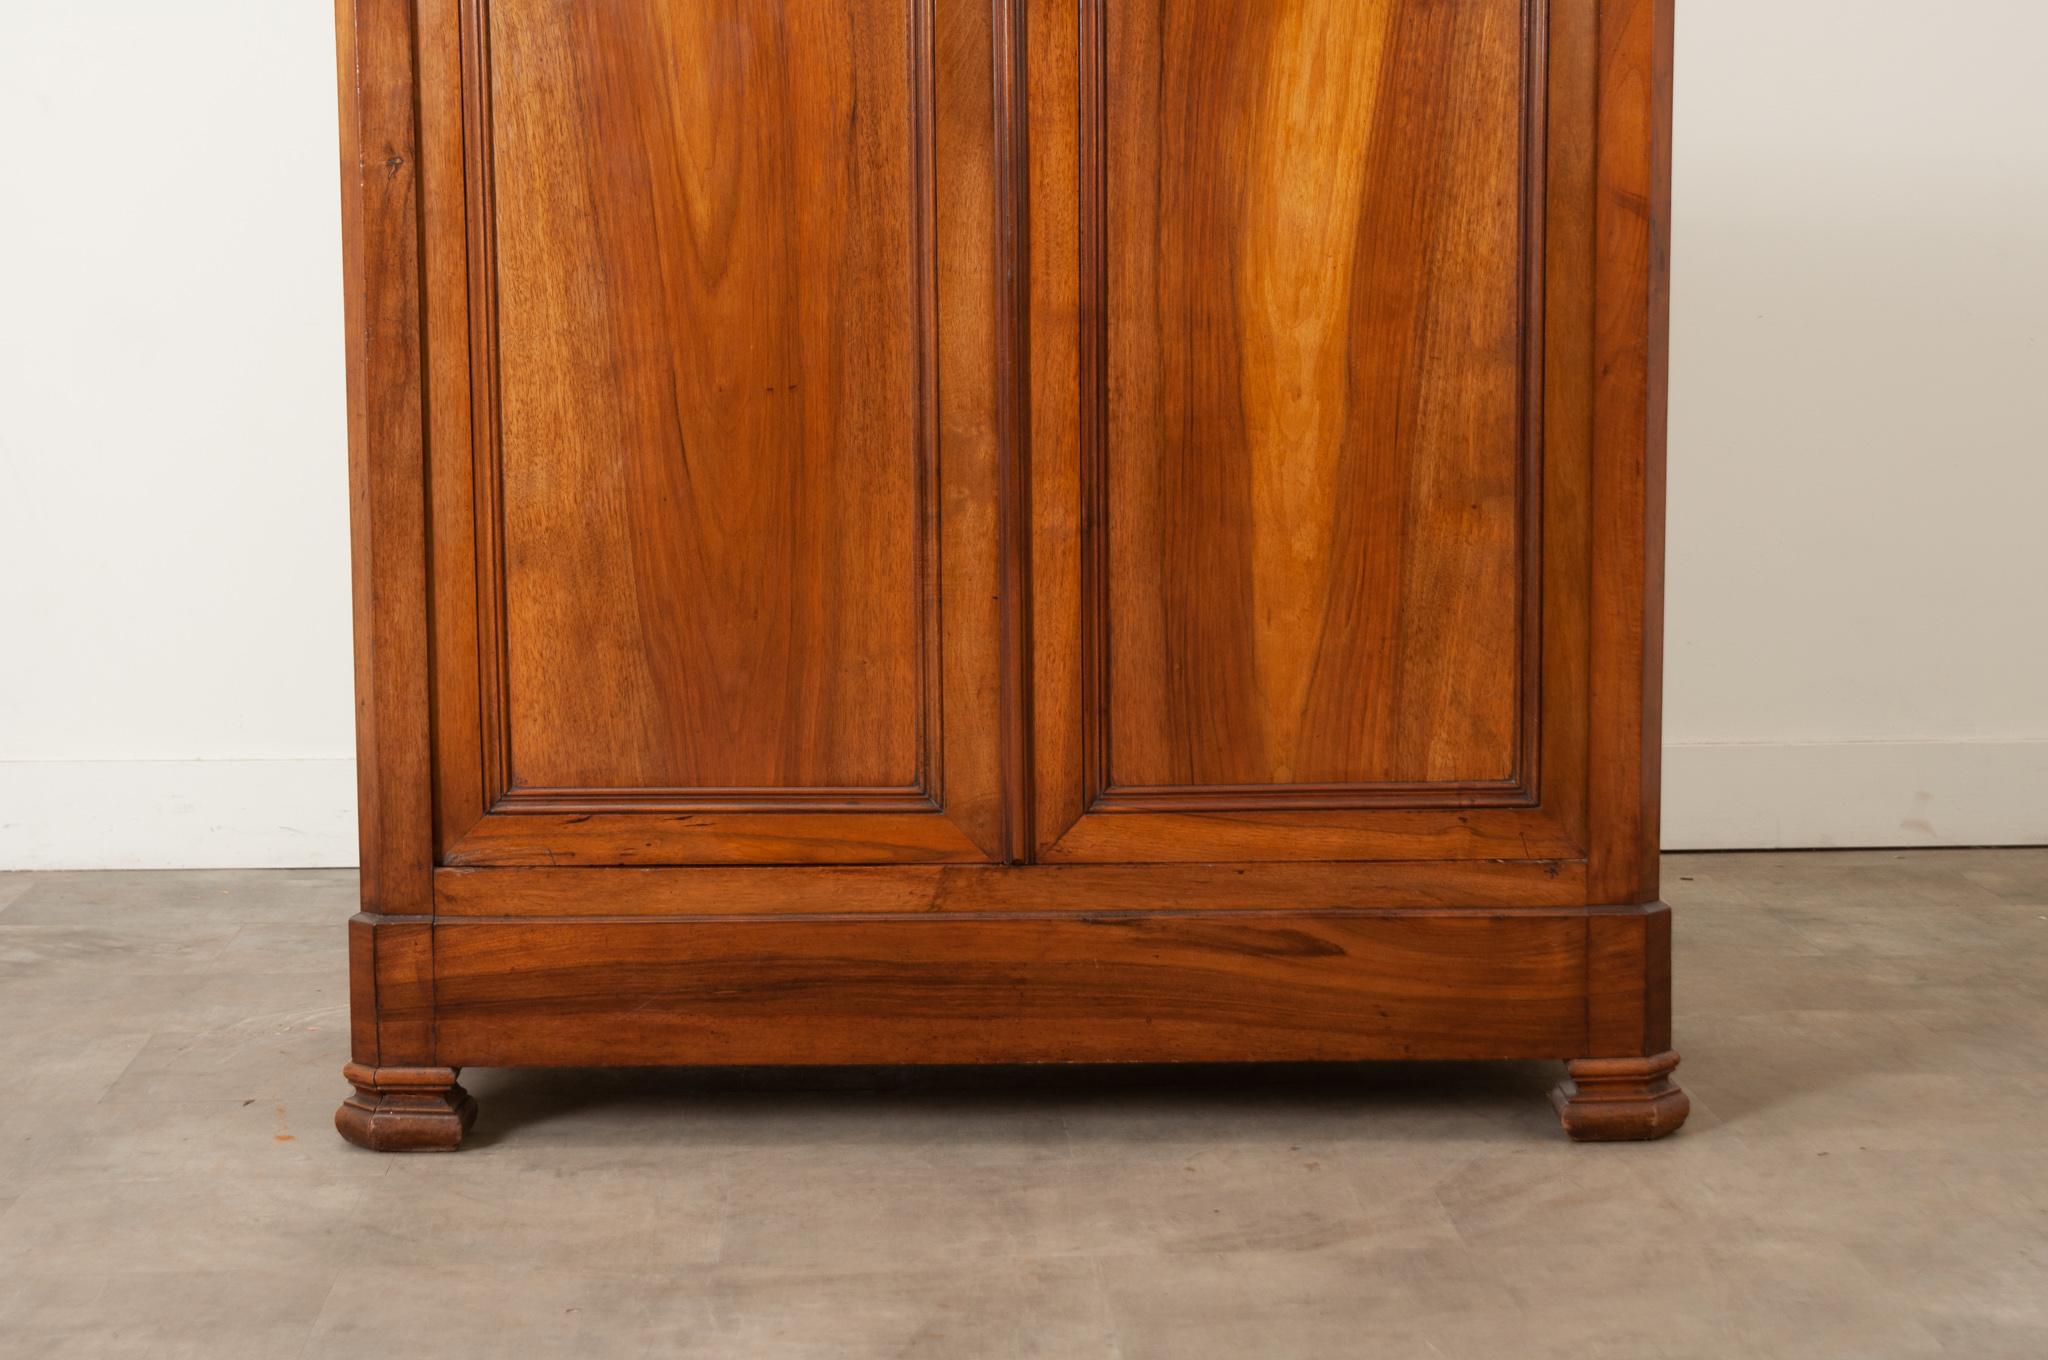 A handsome 19th Century walnut armoire, made in France in the Louis Philippe style. Large paneled doors on hidden hinges are bookmatched. The center lock is functioning and locks with a key. The interior has three fixed shelves, one shelf has two